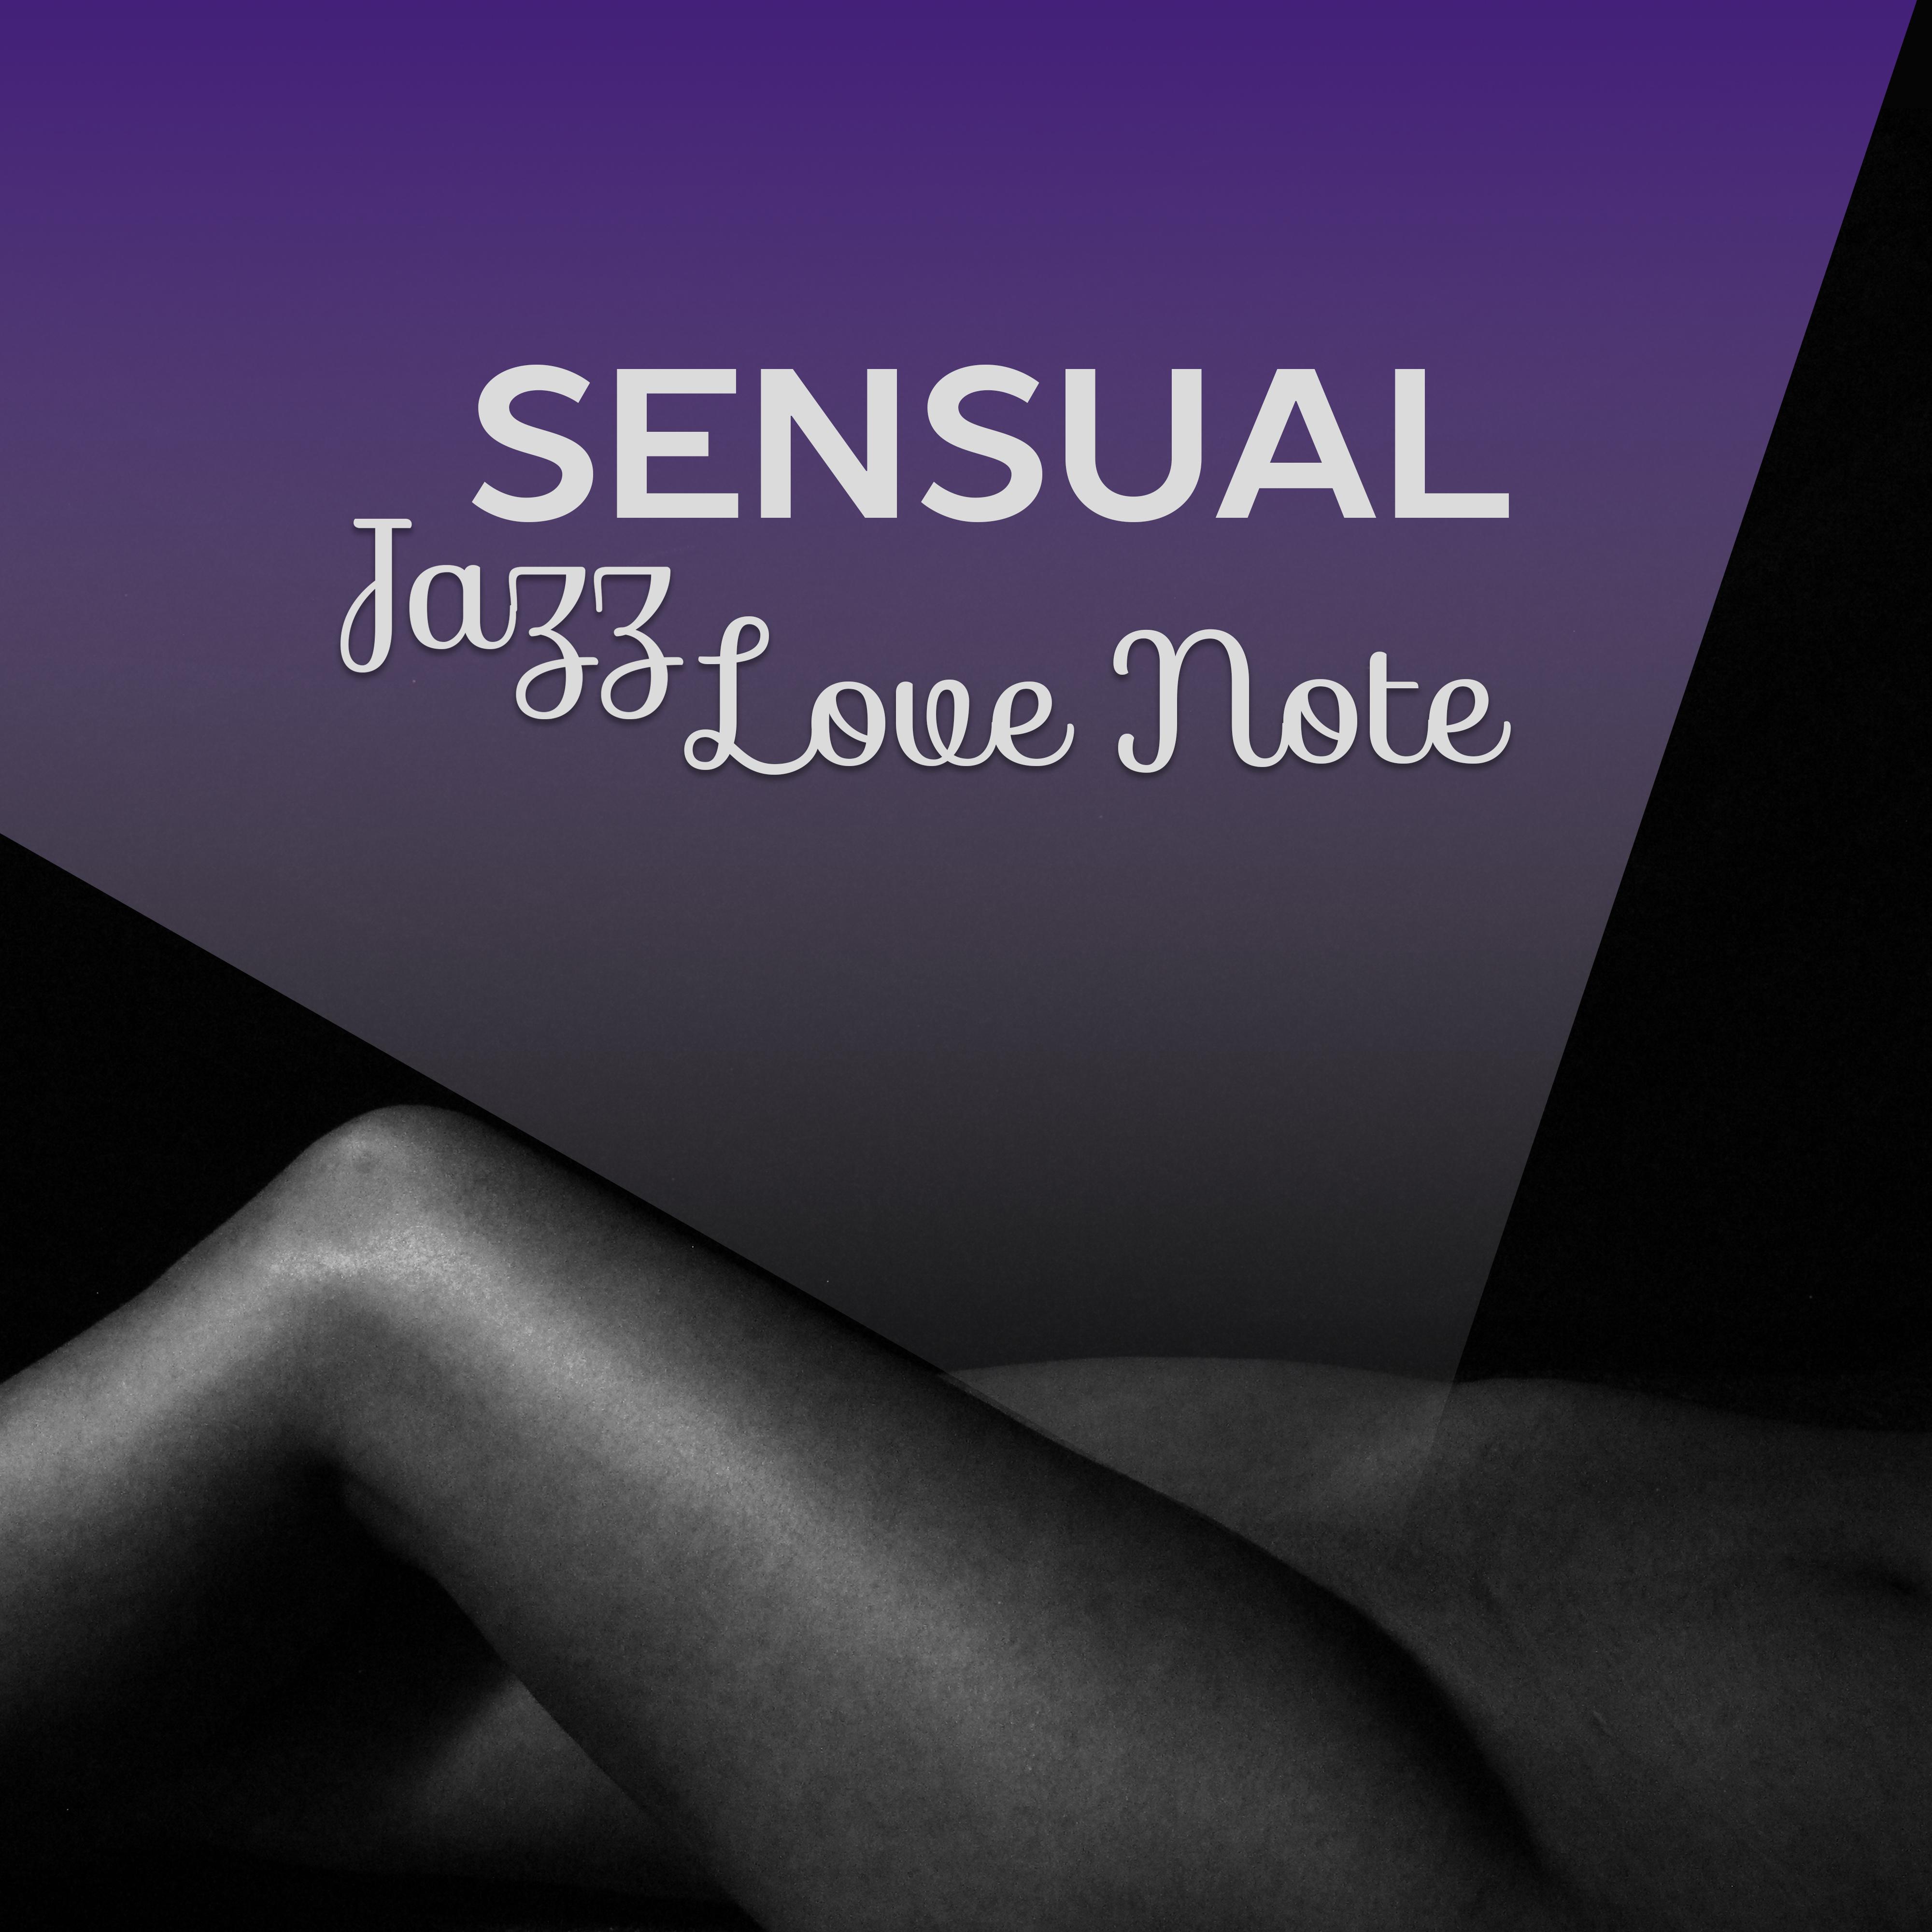 Sensual Jazz Love Note  Soft Music for Lovers, Romantic Background Sounds, Chilled Music, Rest  Relax